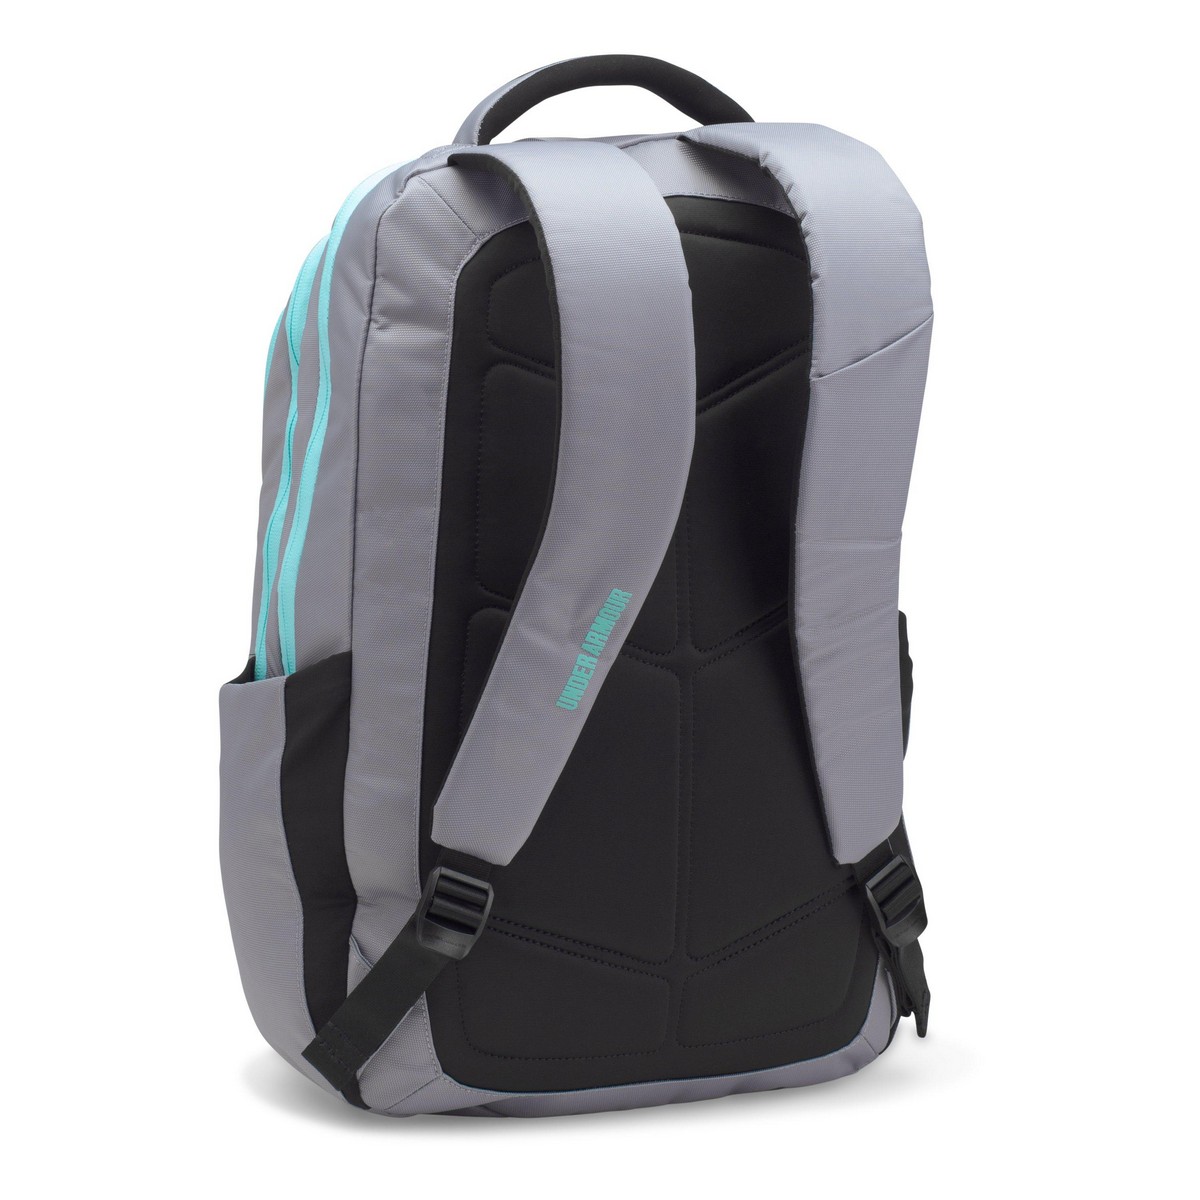 Under Armour ON BALANCE BACKPACK 